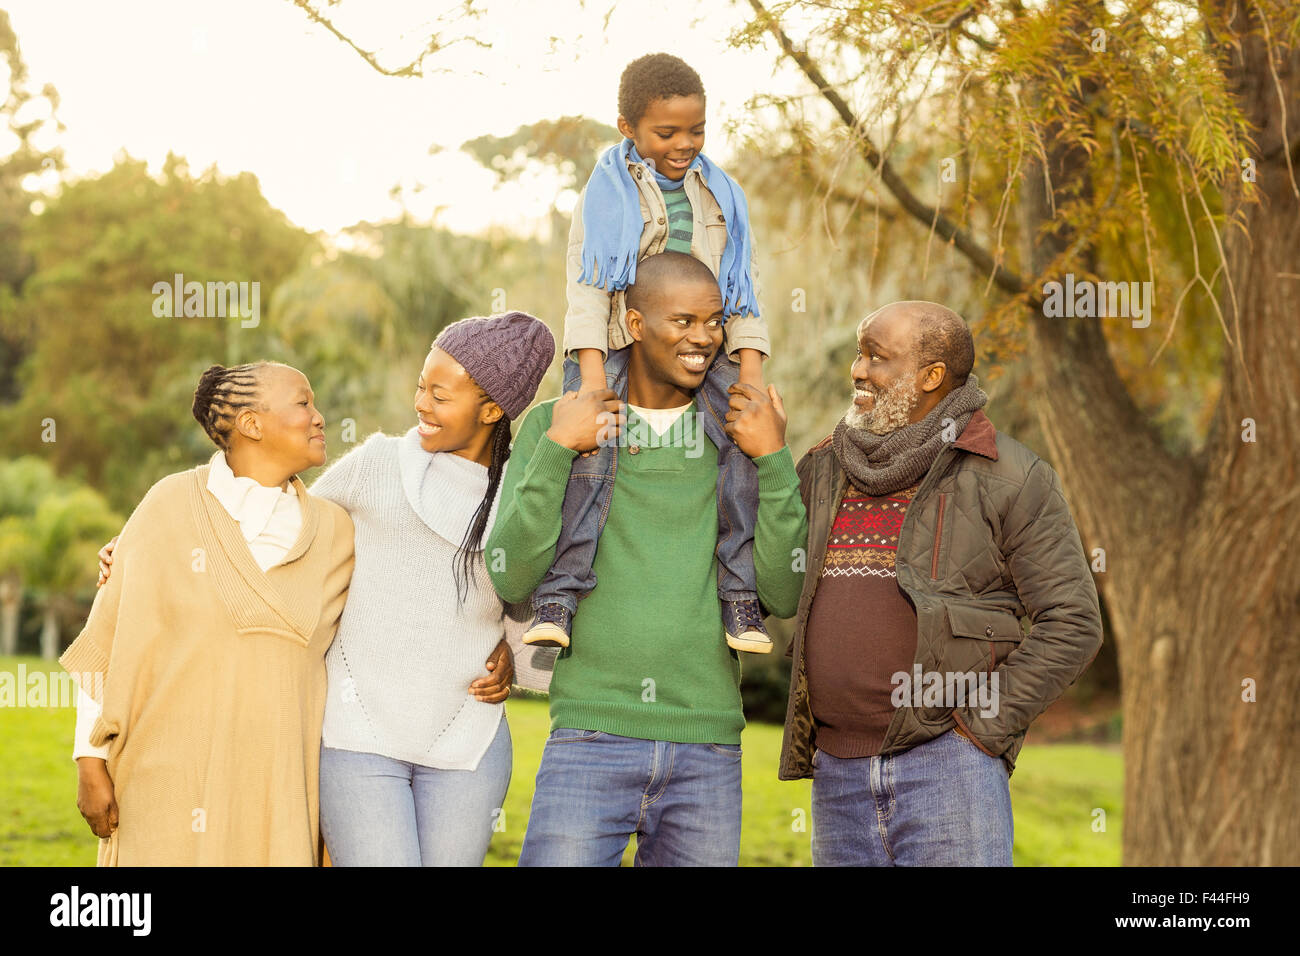 Extended family posing with warm clothes Stock Photo